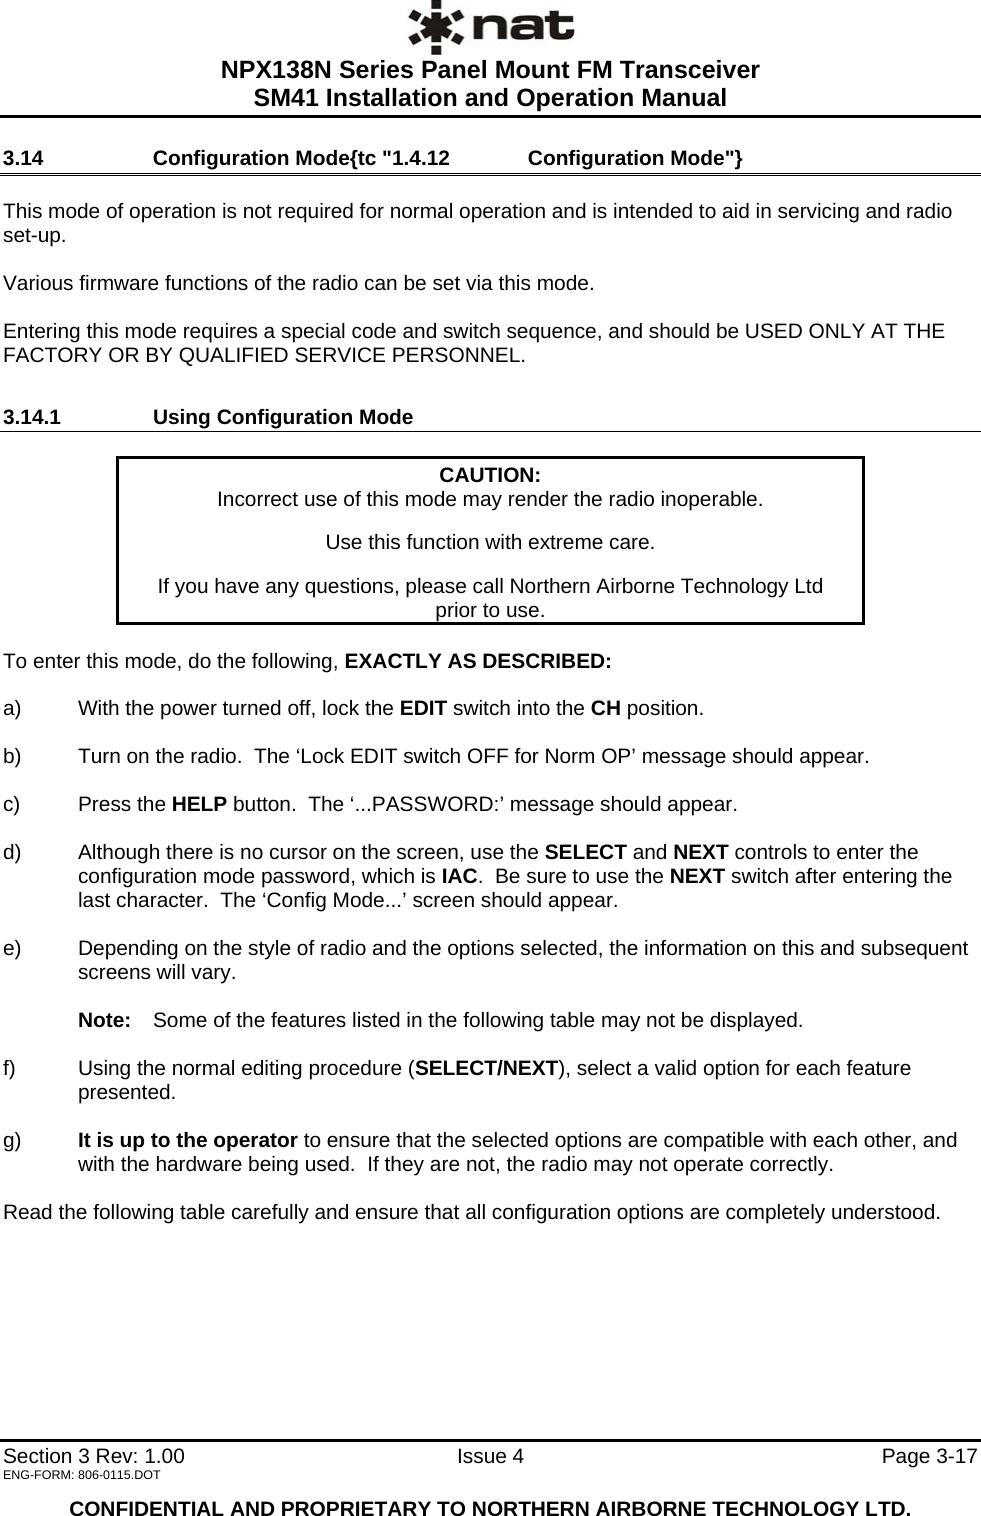  NPX138N Series Panel Mount FM Transceiver  SM41 Installation and Operation Manual   Section 3 Rev: 1.00   Issue 4  Page 3-17 ENG-FORM: 806-0115.DOT  CONFIDENTIAL AND PROPRIETARY TO NORTHERN AIRBORNE TECHNOLOGY LTD. 3.14   Configuration Mode{tc &quot;1.4.12   Configuration Mode&quot;}  This mode of operation is not required for normal operation and is intended to aid in servicing and radio set-up.    Various firmware functions of the radio can be set via this mode.    Entering this mode requires a special code and switch sequence, and should be USED ONLY AT THE FACTORY OR BY QUALIFIED SERVICE PERSONNEL. 3.14.1   Using Configuration Mode  CAUTION: Incorrect use of this mode may render the radio inoperable.  Use this function with extreme care.  If you have any questions, please call Northern Airborne Technology Ltd  prior to use.  To enter this mode, do the following, EXACTLY AS DESCRIBED:  a)  With the power turned off, lock the EDIT switch into the CH position.  b)  Turn on the radio.  The ‘Lock EDIT switch OFF for Norm OP’ message should appear.  c) Press the HELP button.  The ‘...PASSWORD:’ message should appear.  d)  Although there is no cursor on the screen, use the SELECT and NEXT controls to enter the configuration mode password, which is IAC.  Be sure to use the NEXT switch after entering the last character.  The ‘Config Mode...’ screen should appear.  e)  Depending on the style of radio and the options selected, the information on this and subsequent screens will vary.    Note:   Some of the features listed in the following table may not be displayed.  f)  Using the normal editing procedure (SELECT/NEXT), select a valid option for each feature presented.  g)  It is up to the operator to ensure that the selected options are compatible with each other, and with the hardware being used.  If they are not, the radio may not operate correctly.    Read the following table carefully and ensure that all configuration options are completely understood.        